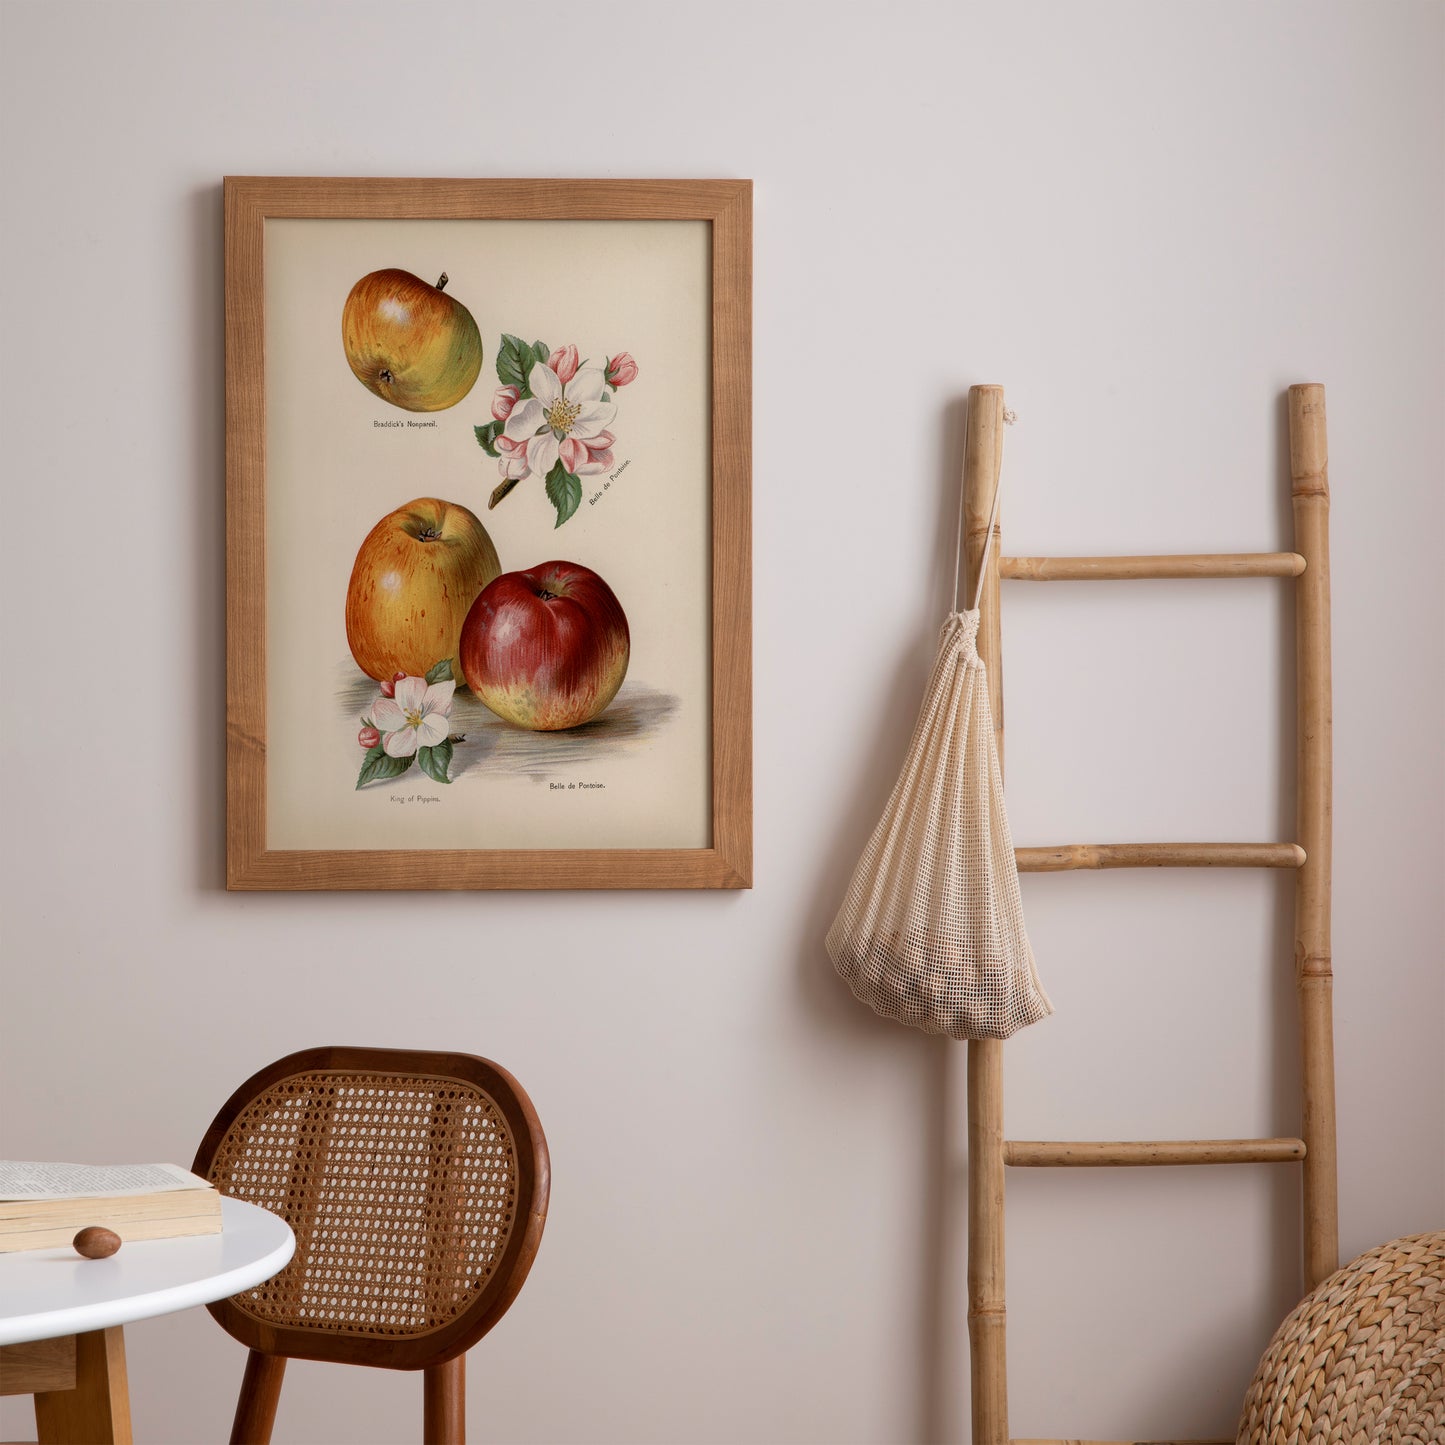 Miss May Rivers Vintage Fruits Posters